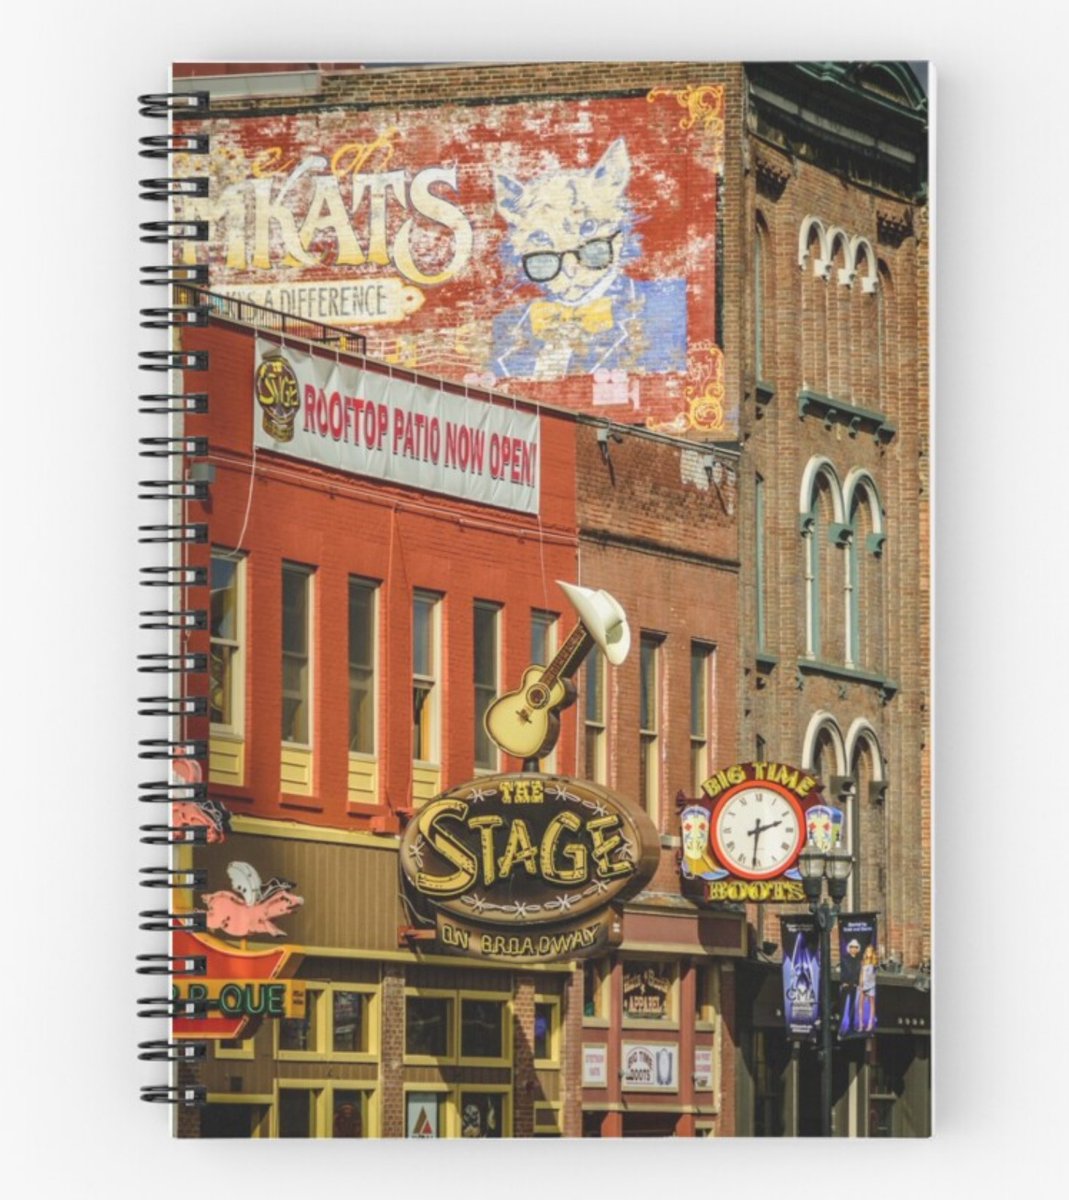 Honky Tonk Row - Nashville TN by Debra Martz In #Nashville it's all about the music and the boots! Great #music venues and GREAT #Signs and murals, too!! 

#RBandMe #RedbubbleShop #FindYourThing

GET-IT-HERE: Spiral Notebook buff.ly/3UcHlRv 

#BuyIntoArt #rtArtBoost